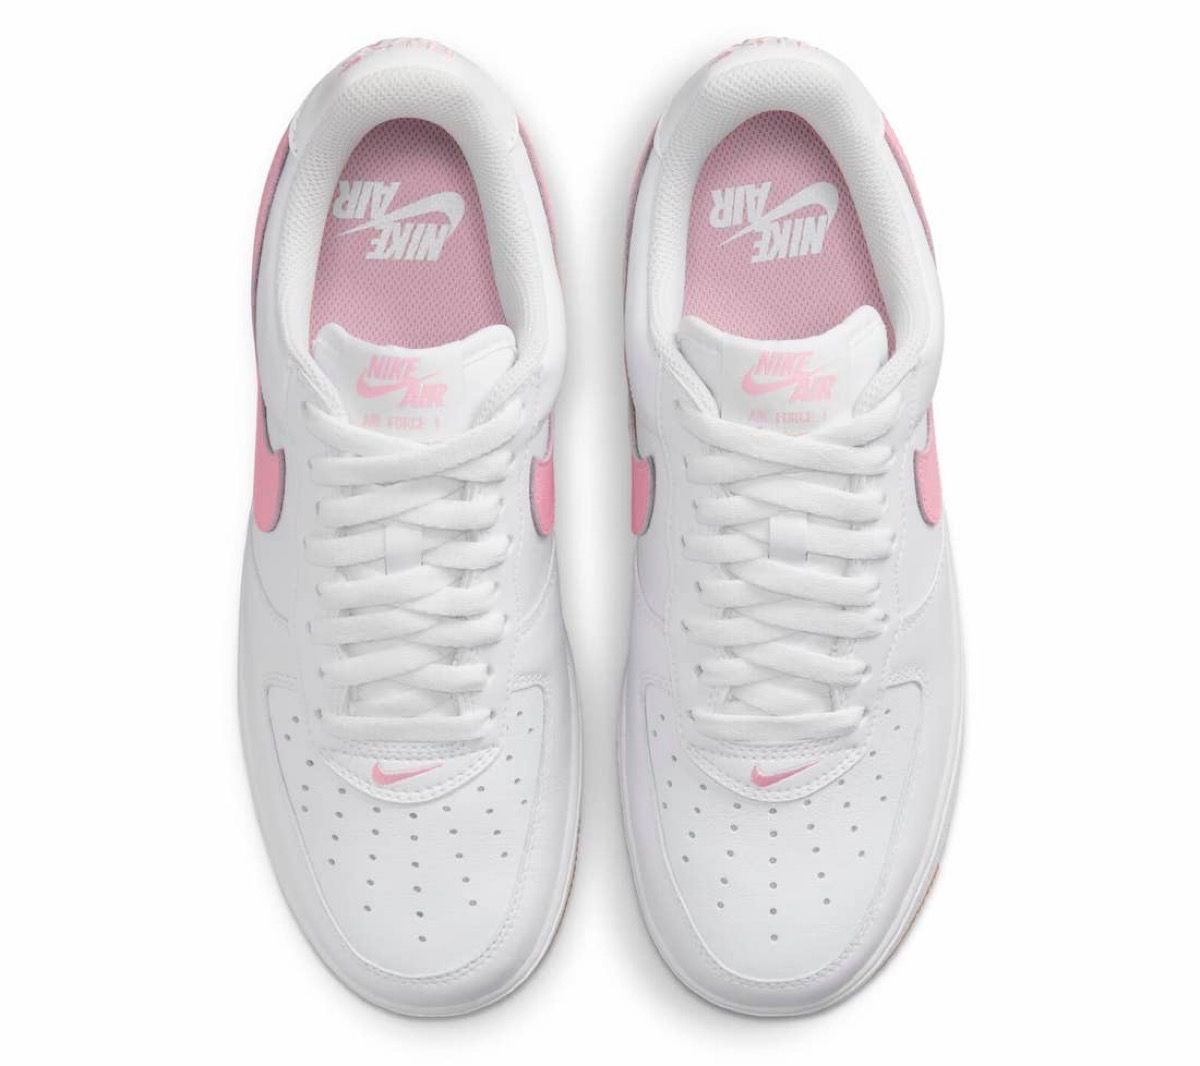 Nike Air Force 1 Low Retro “Color of the Month” White/Pinkが国内10